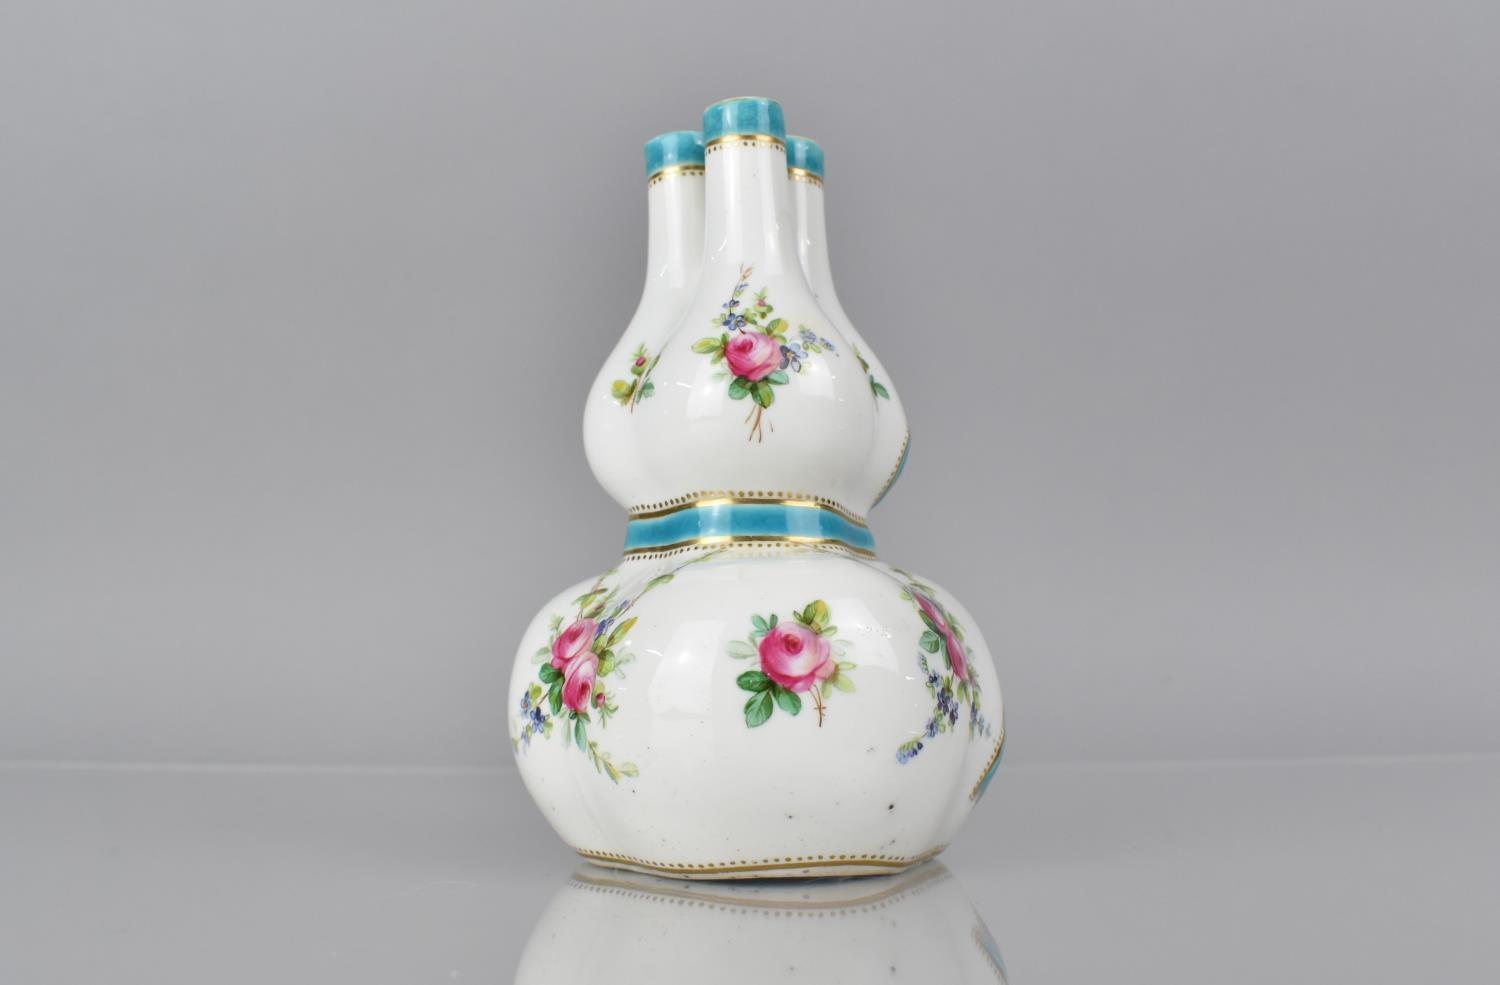 A 19th Century Porcelain Tulip Vase of Double Gourd Form with Tri Neck decorated with Rose Garland - Image 3 of 5